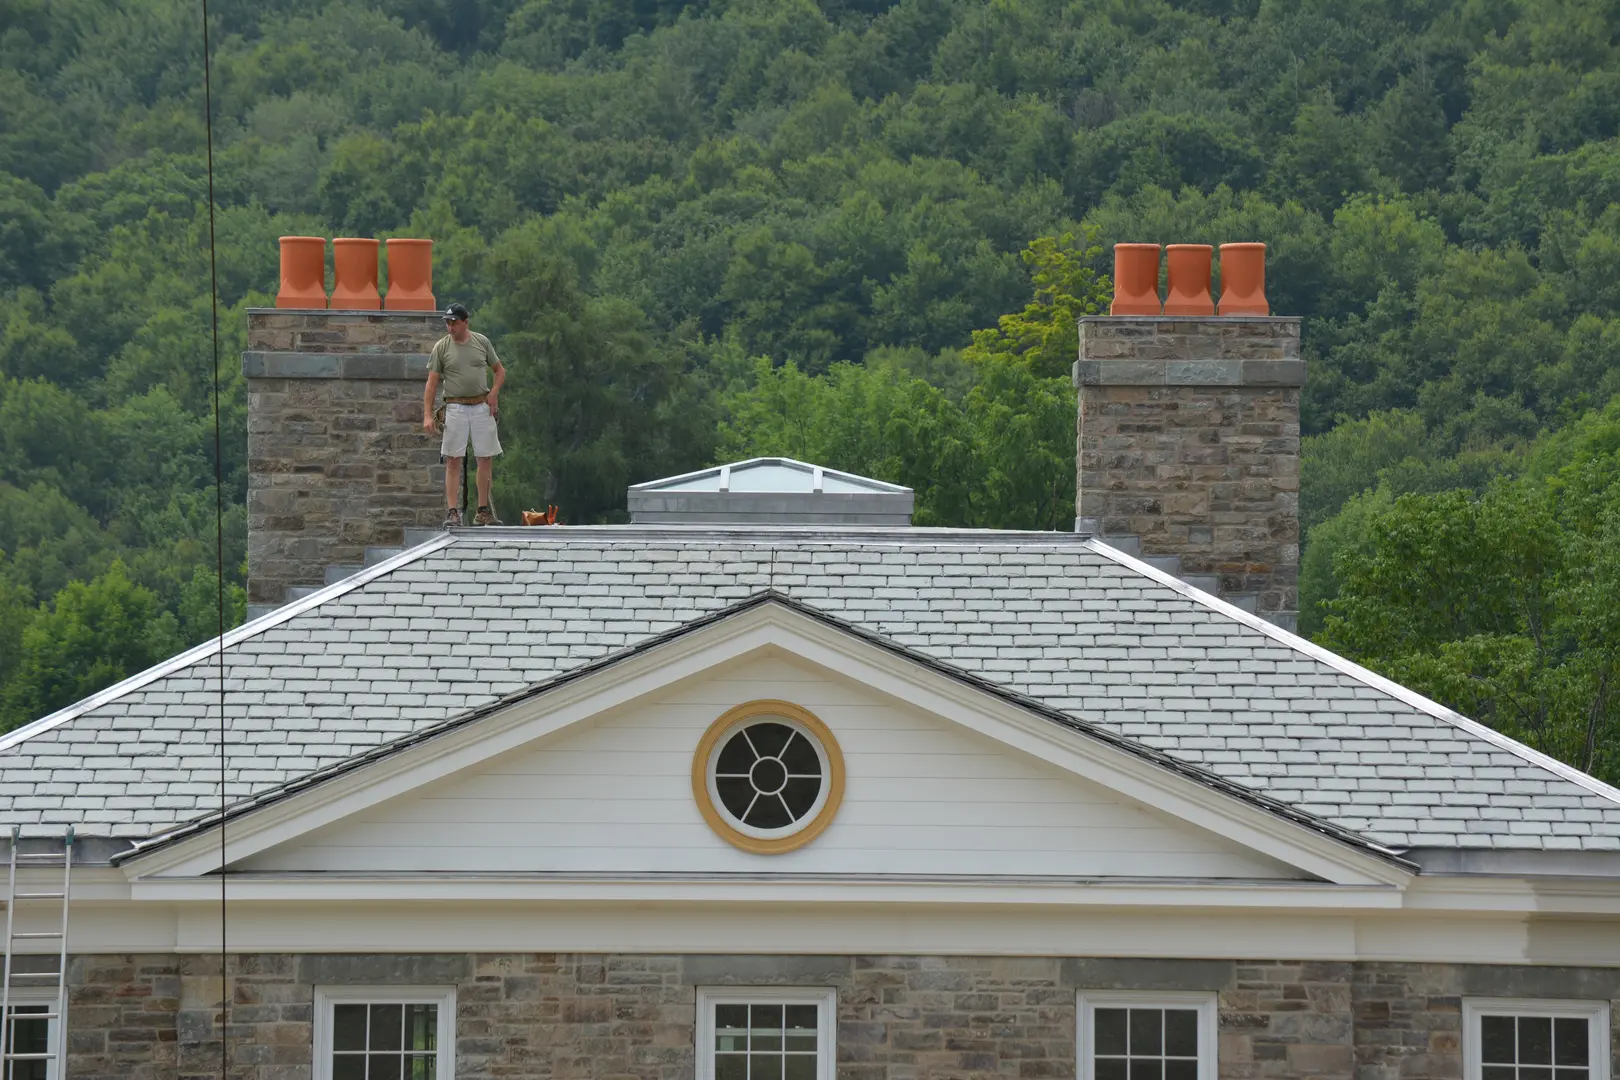 A man standing on top of a building near some trees.